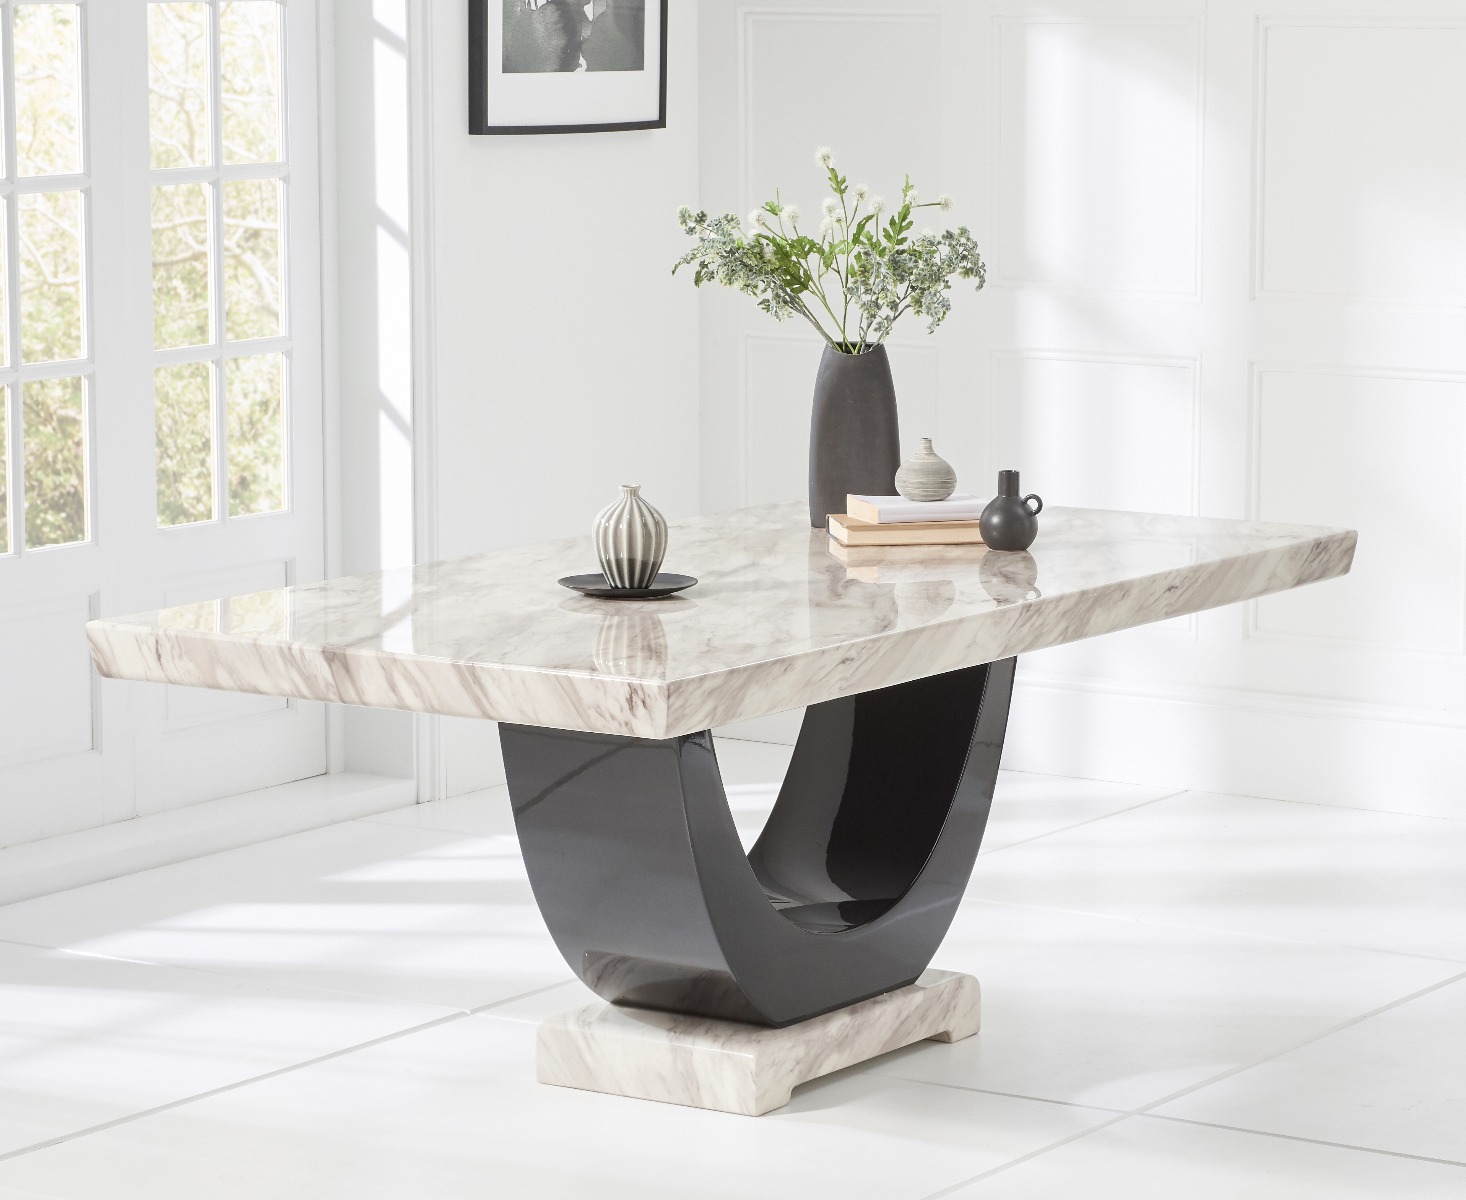 Photo 4 of Novara 200cm cream and black pedestal marble dining table with 6 grey sophia chairs